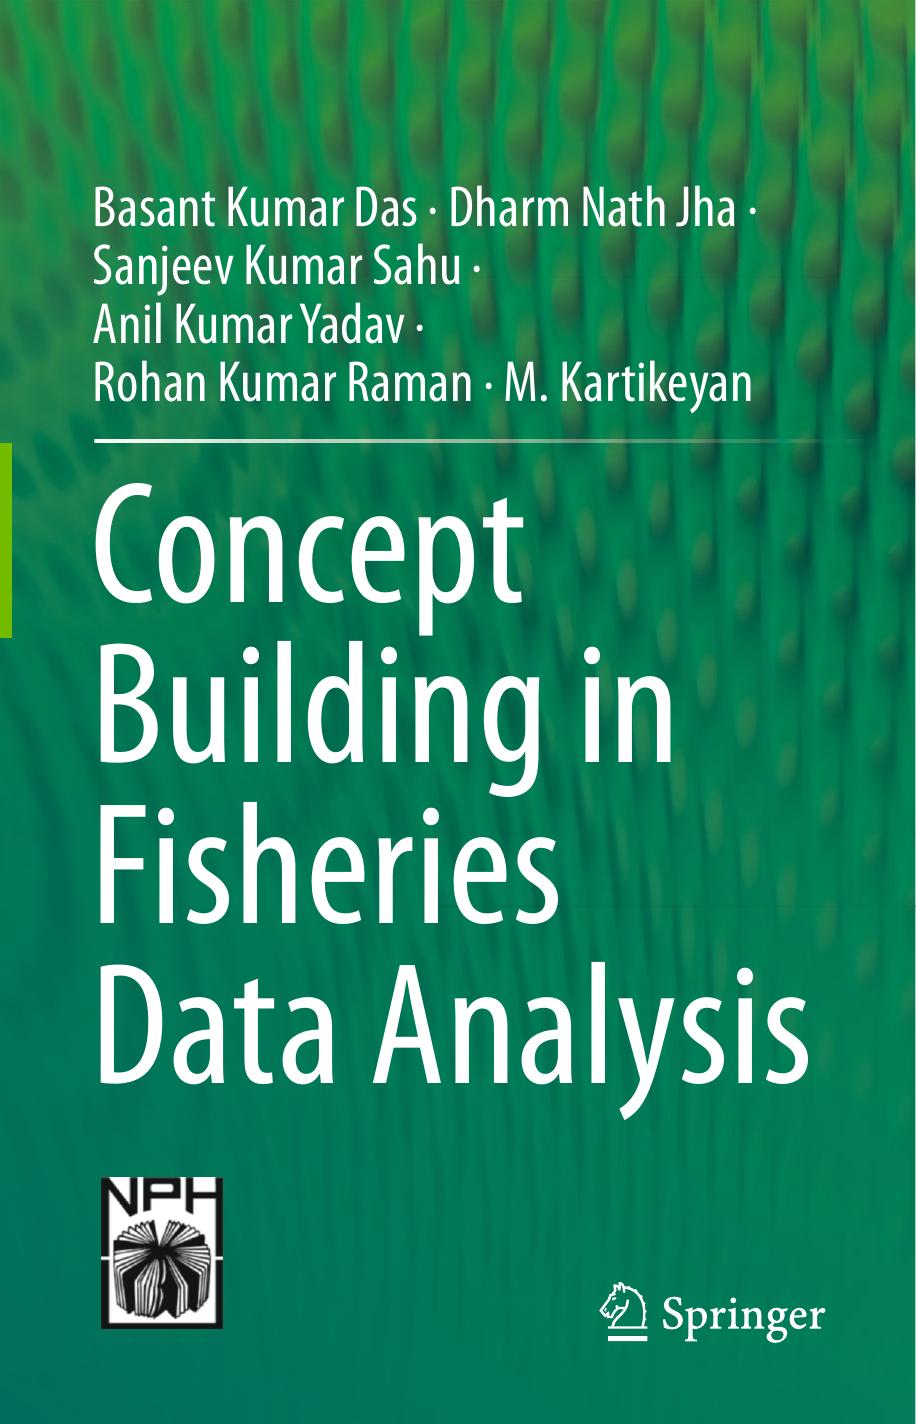 Concept Building in Fisheries Data Analysis-Springer (2022)